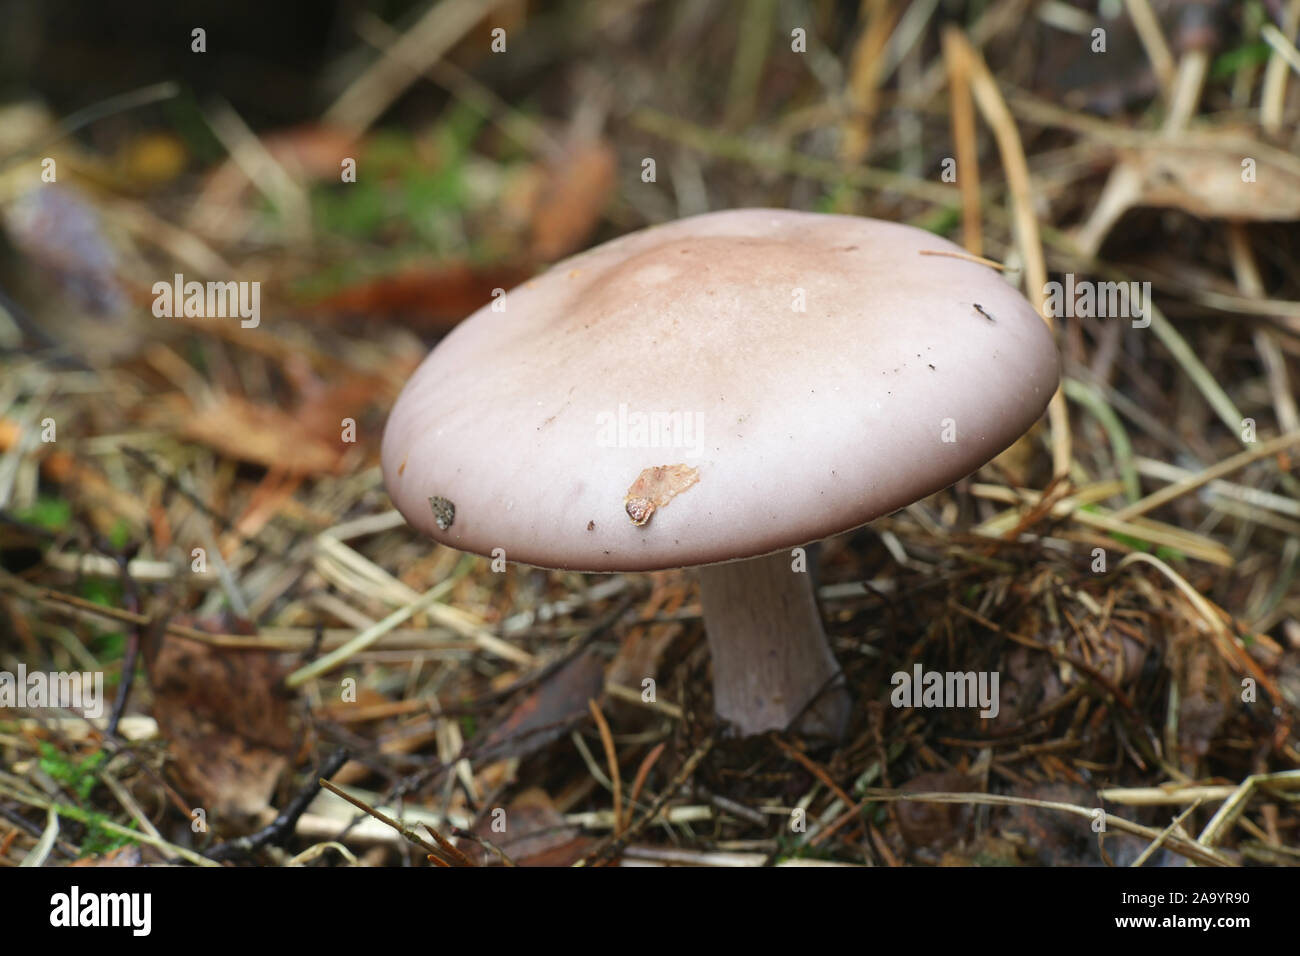 Lepista nuda, known as the Wood Blewit, wild mushroom from Finland Stock Photo